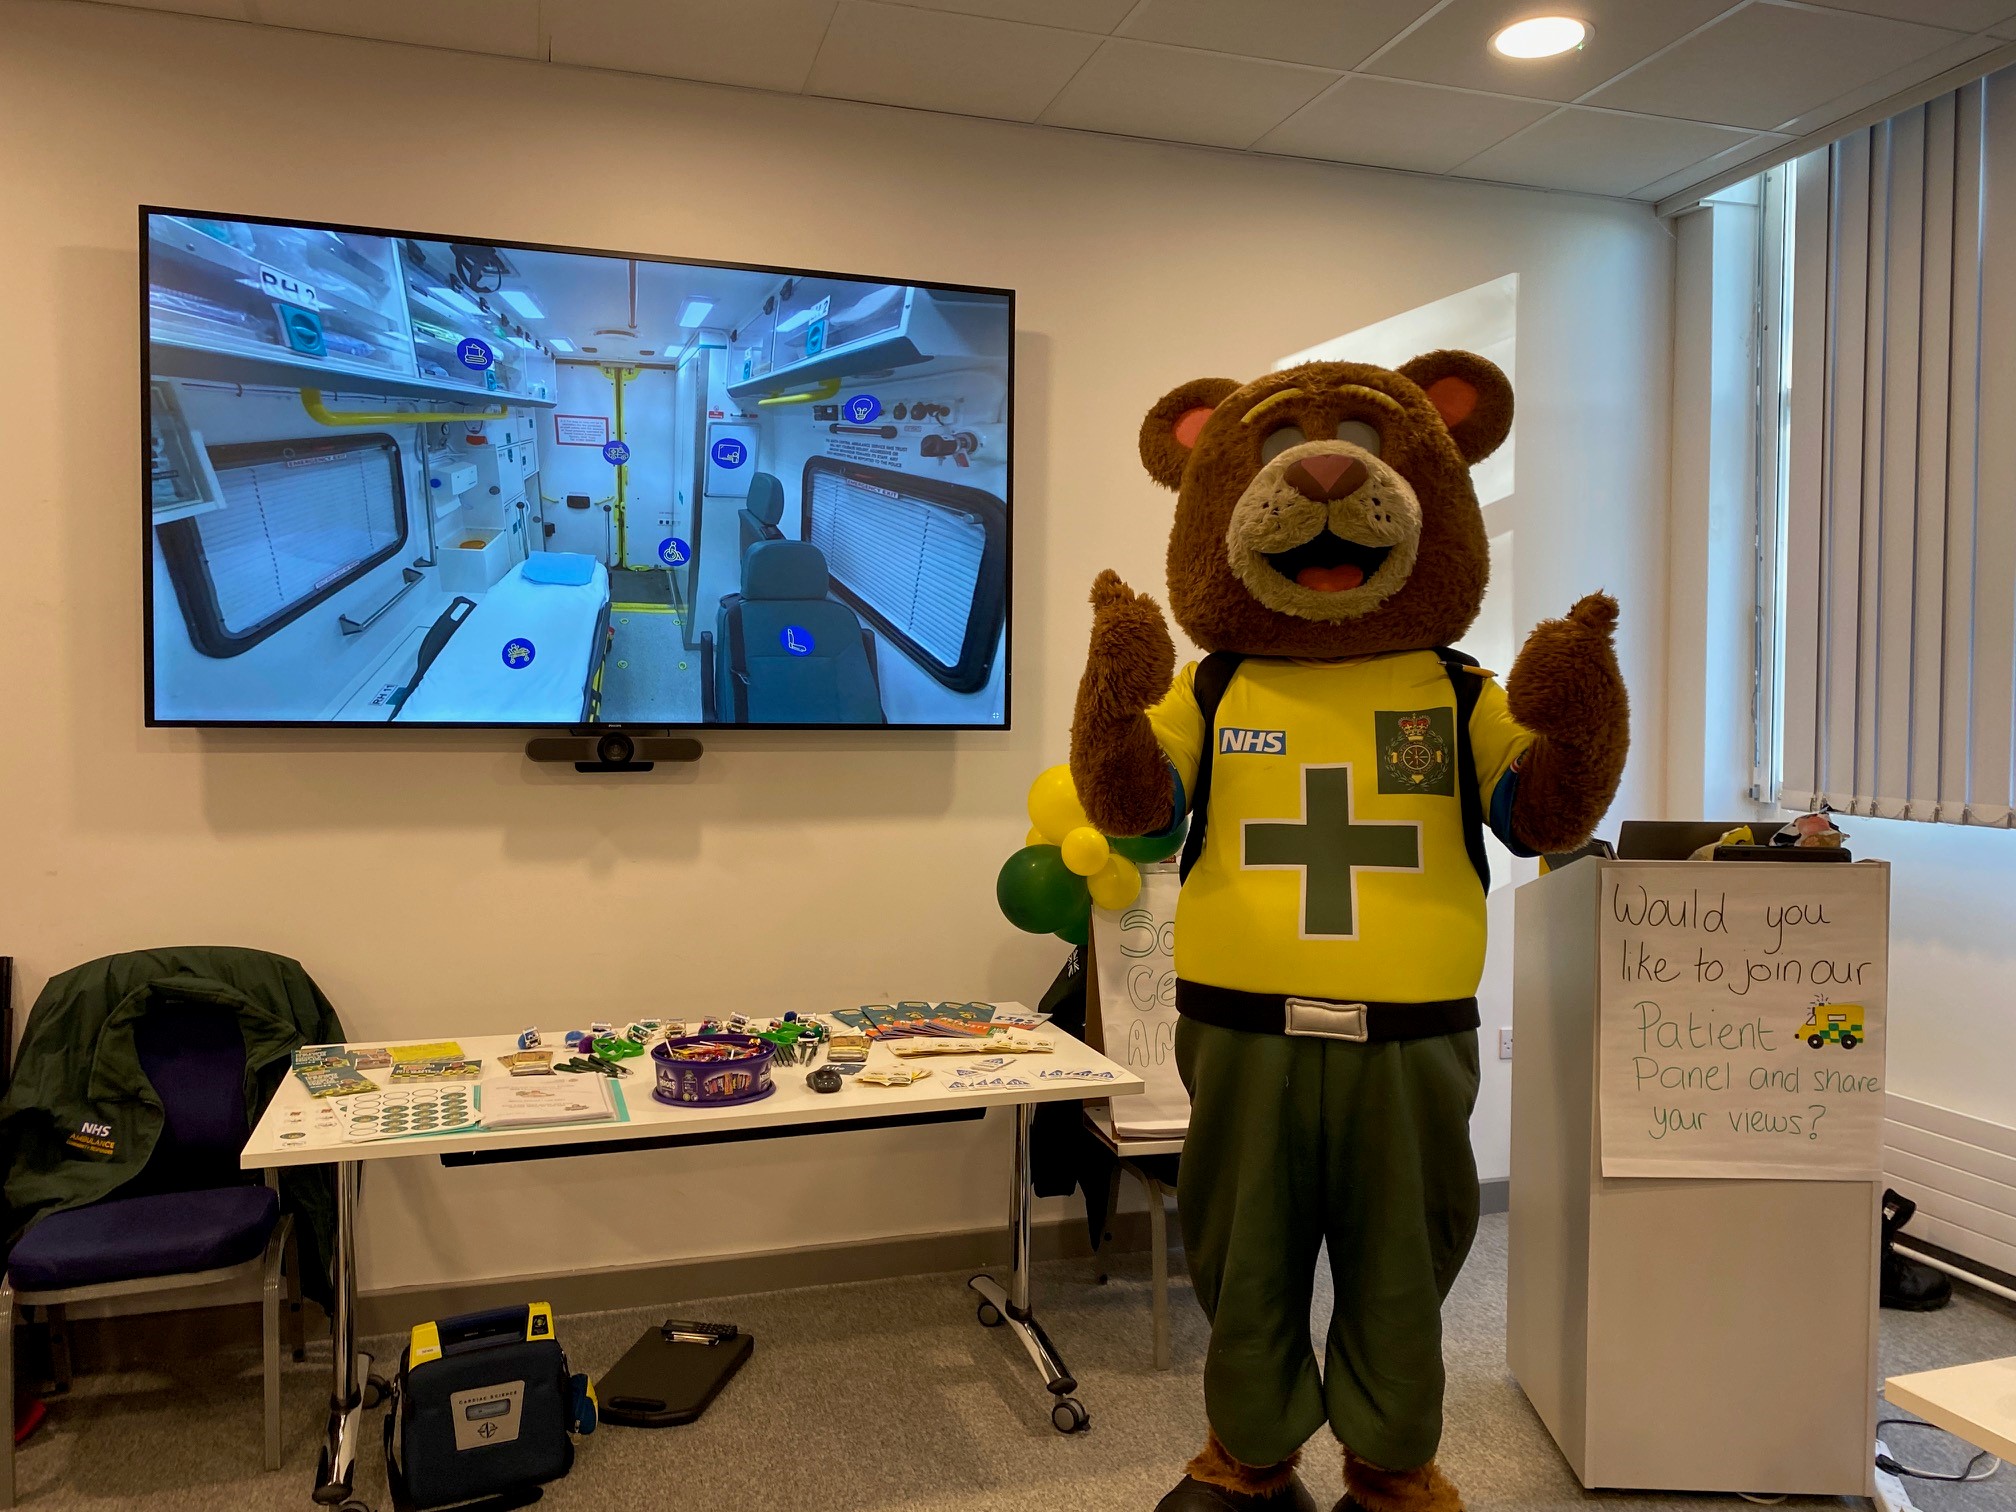 999 TED at Live Better health promotion event in Oxfordshire